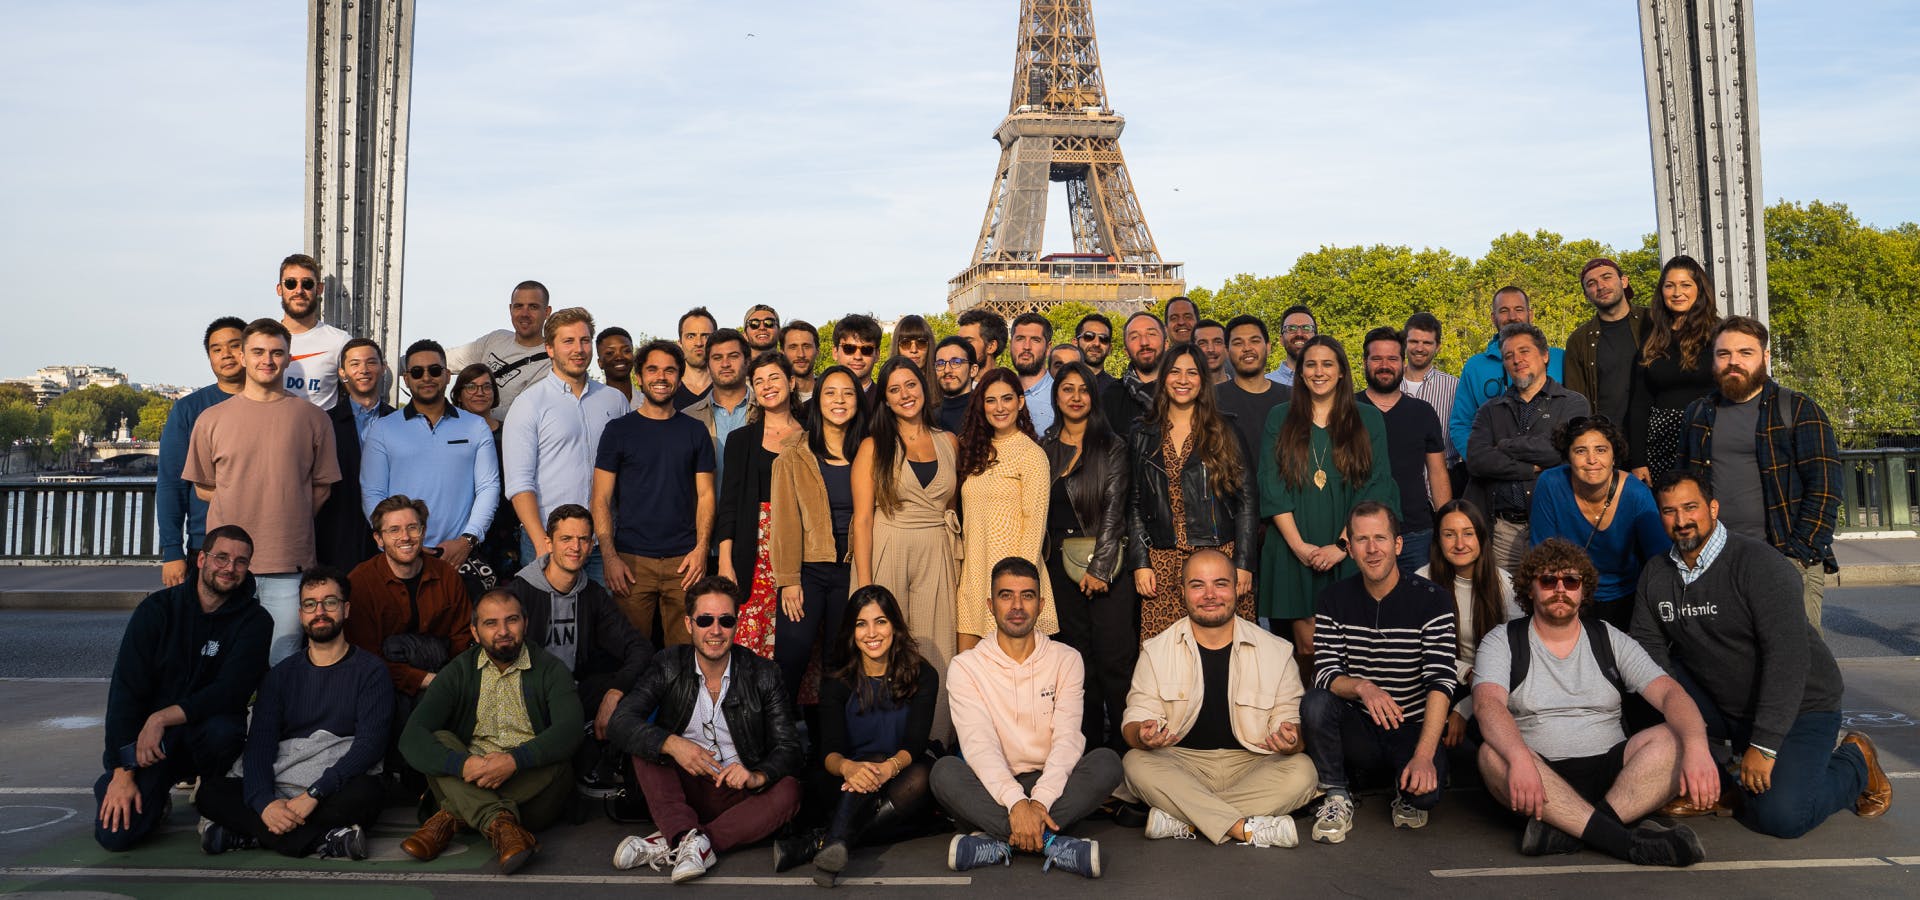 Picture of the Prismic team in Paris in front of the Eiffel tower